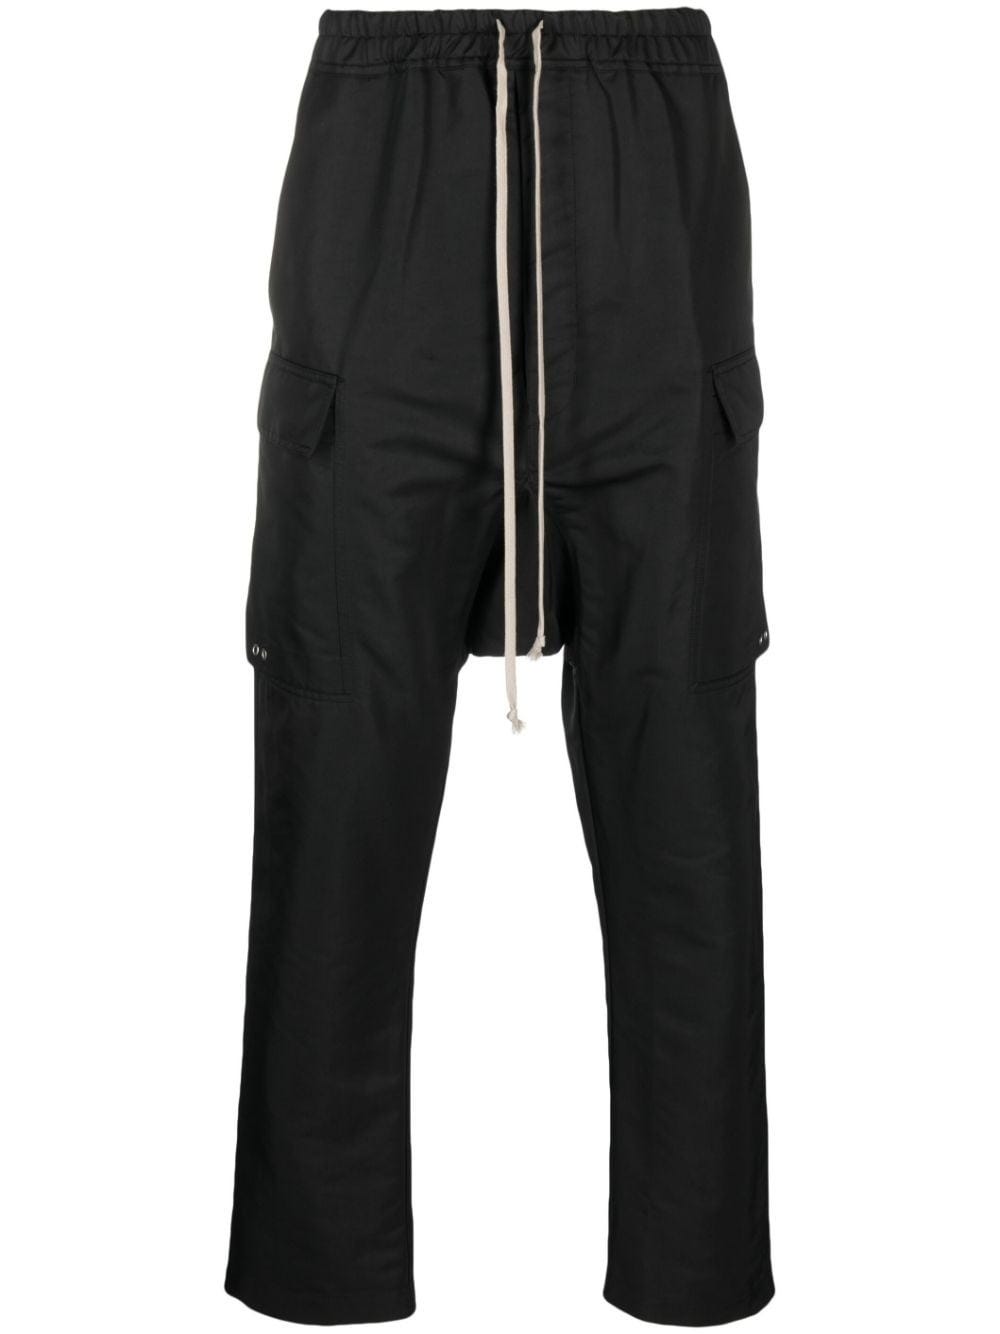 RICK OWENS BLACK STRAIGHT PANTS WITH LOW CROTCH